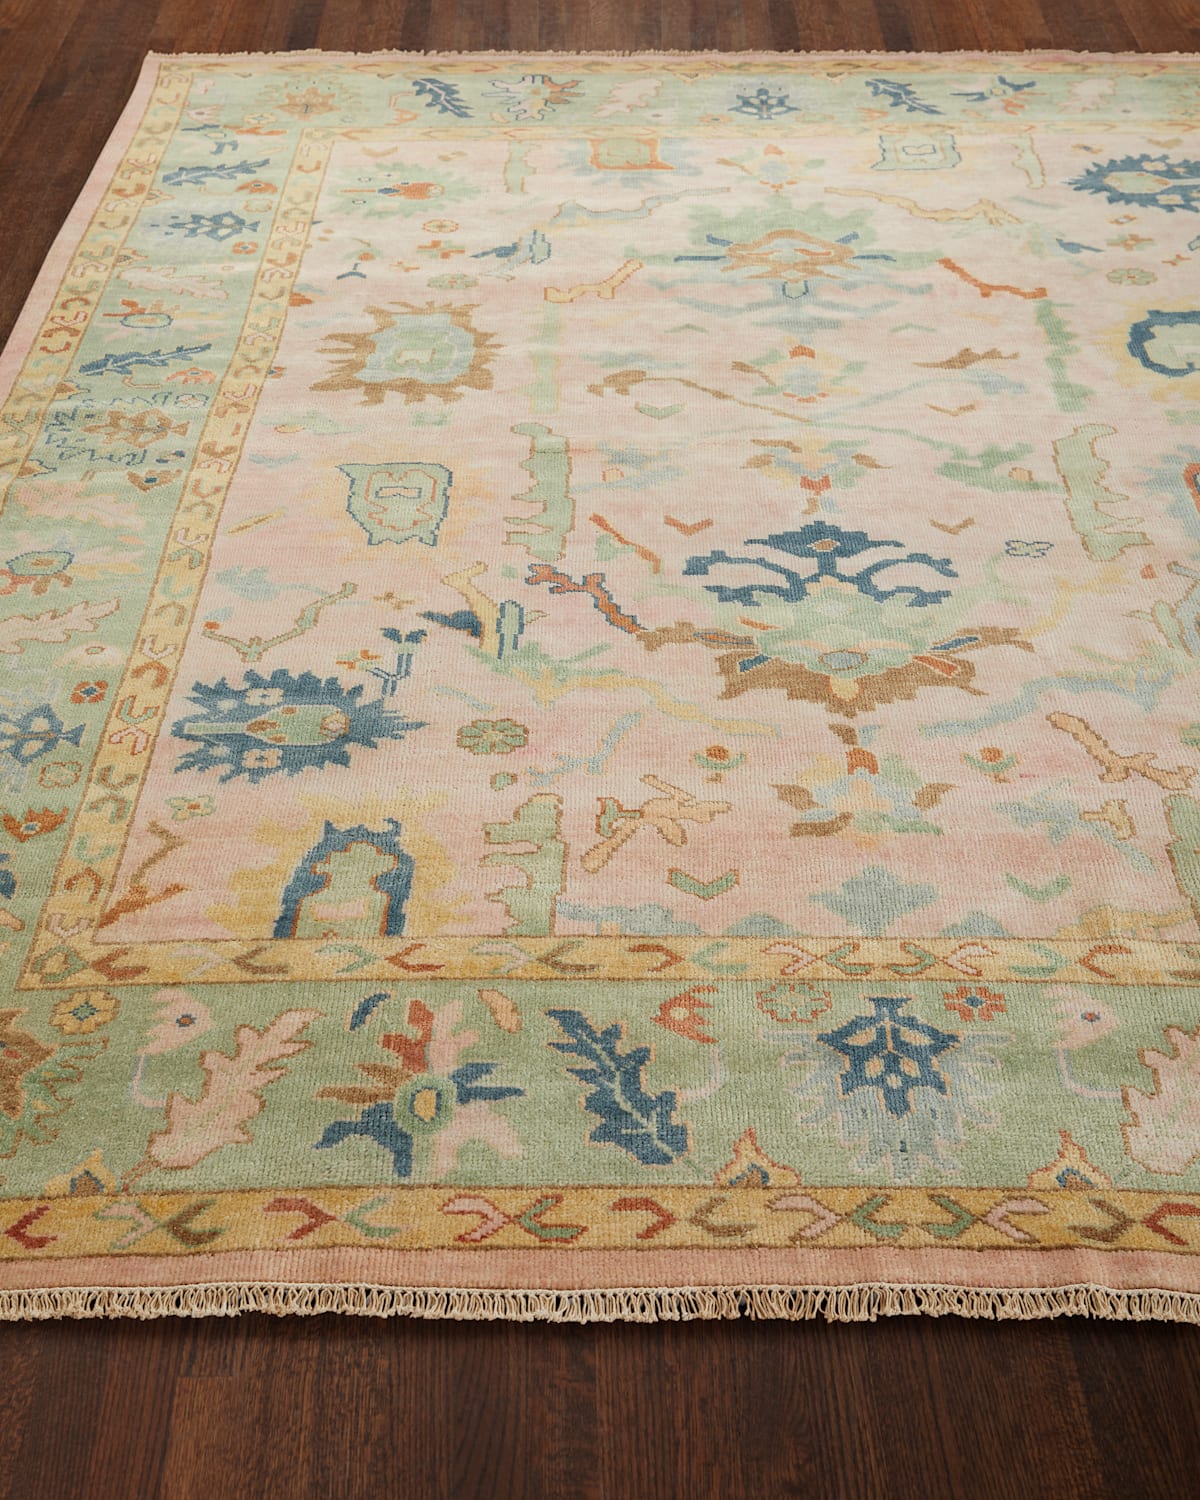 Emilia Hand-Knotted Rug, 6' x 9'